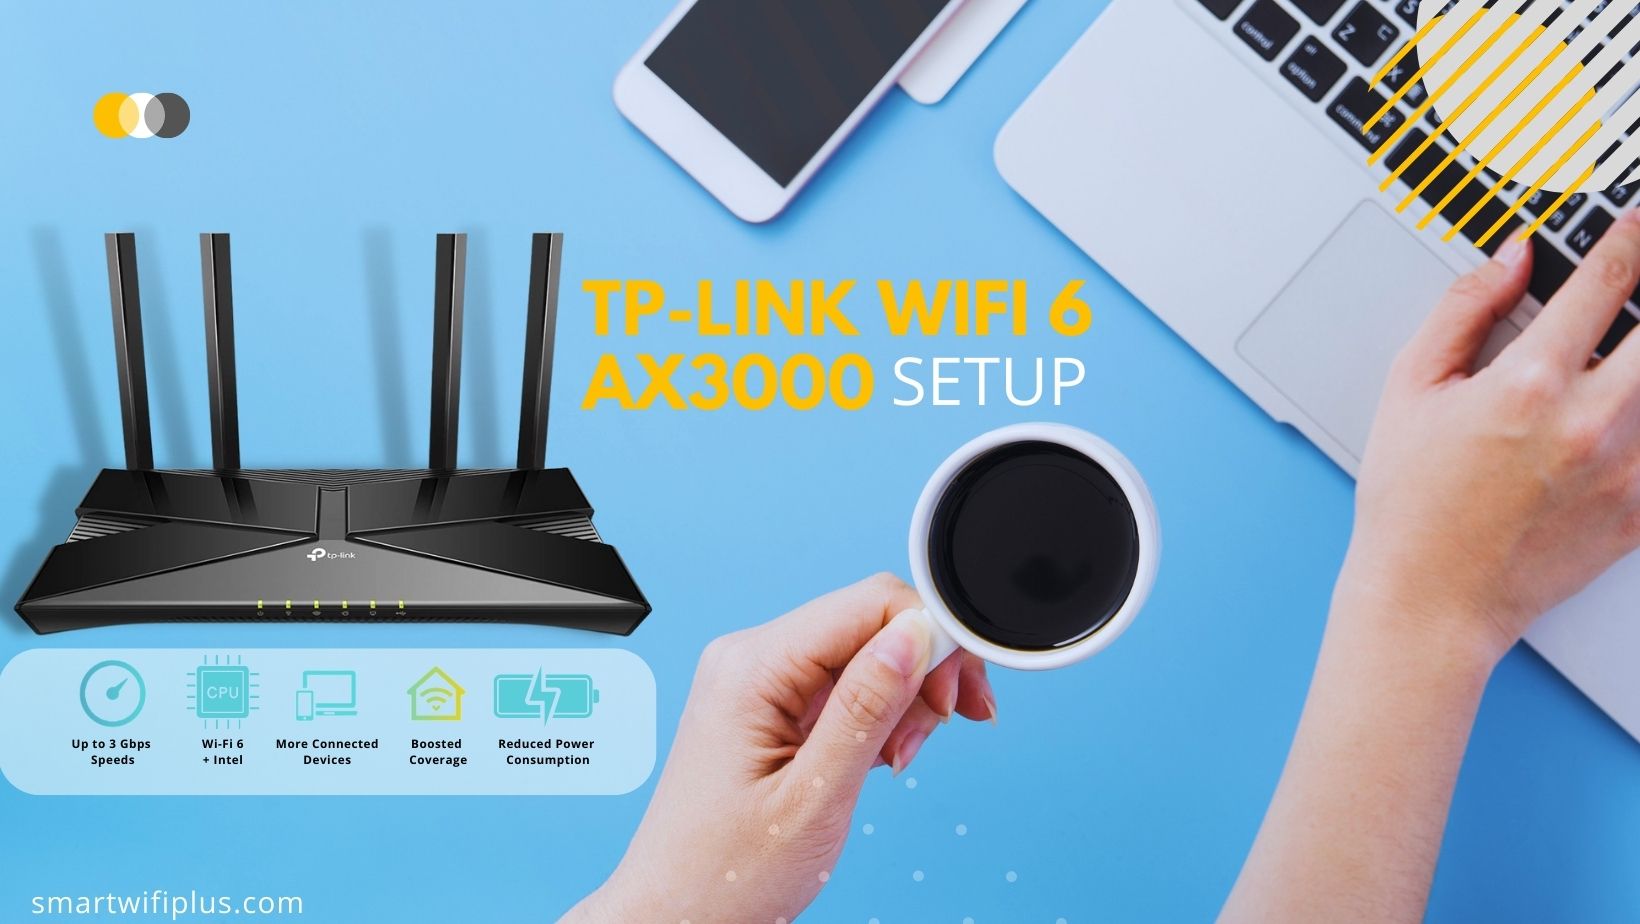 How To Setup Tp-Link WIFI 6 Ax3000 Smart Wifi Router